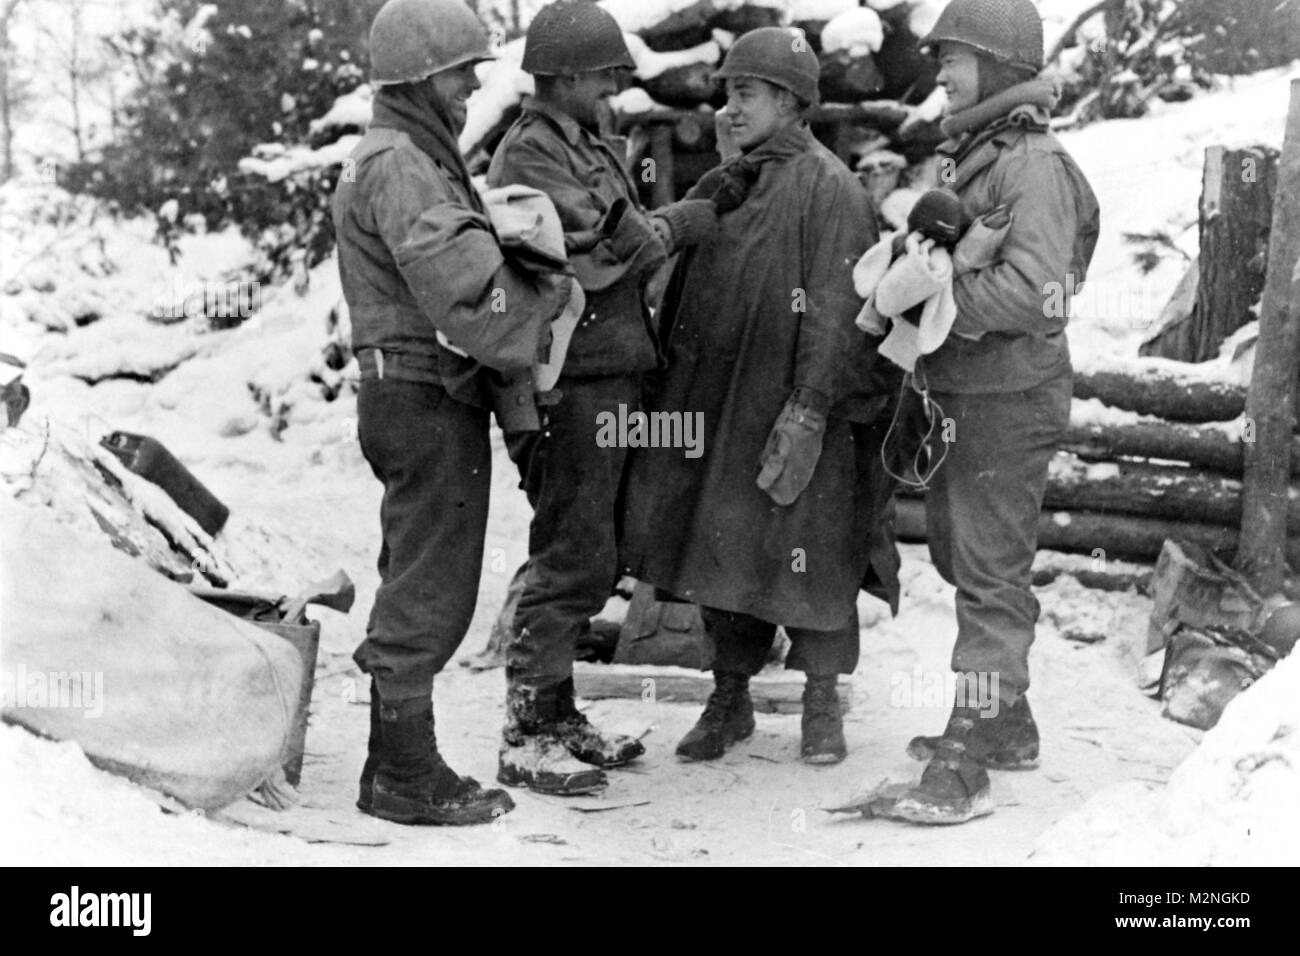 KLEINHAU, Germany, January 29, 1945 - Soldiers of the Company L, 3rd Battalion, 121st Infantry Regiment try on clothing during a lull in fighting in the Hurtgen Forest near the town of Kleinhau. Photo 327126, National Archives Records Administration (NARA), College Park, Md. Resupply by Georgia National Guard Stock Photo